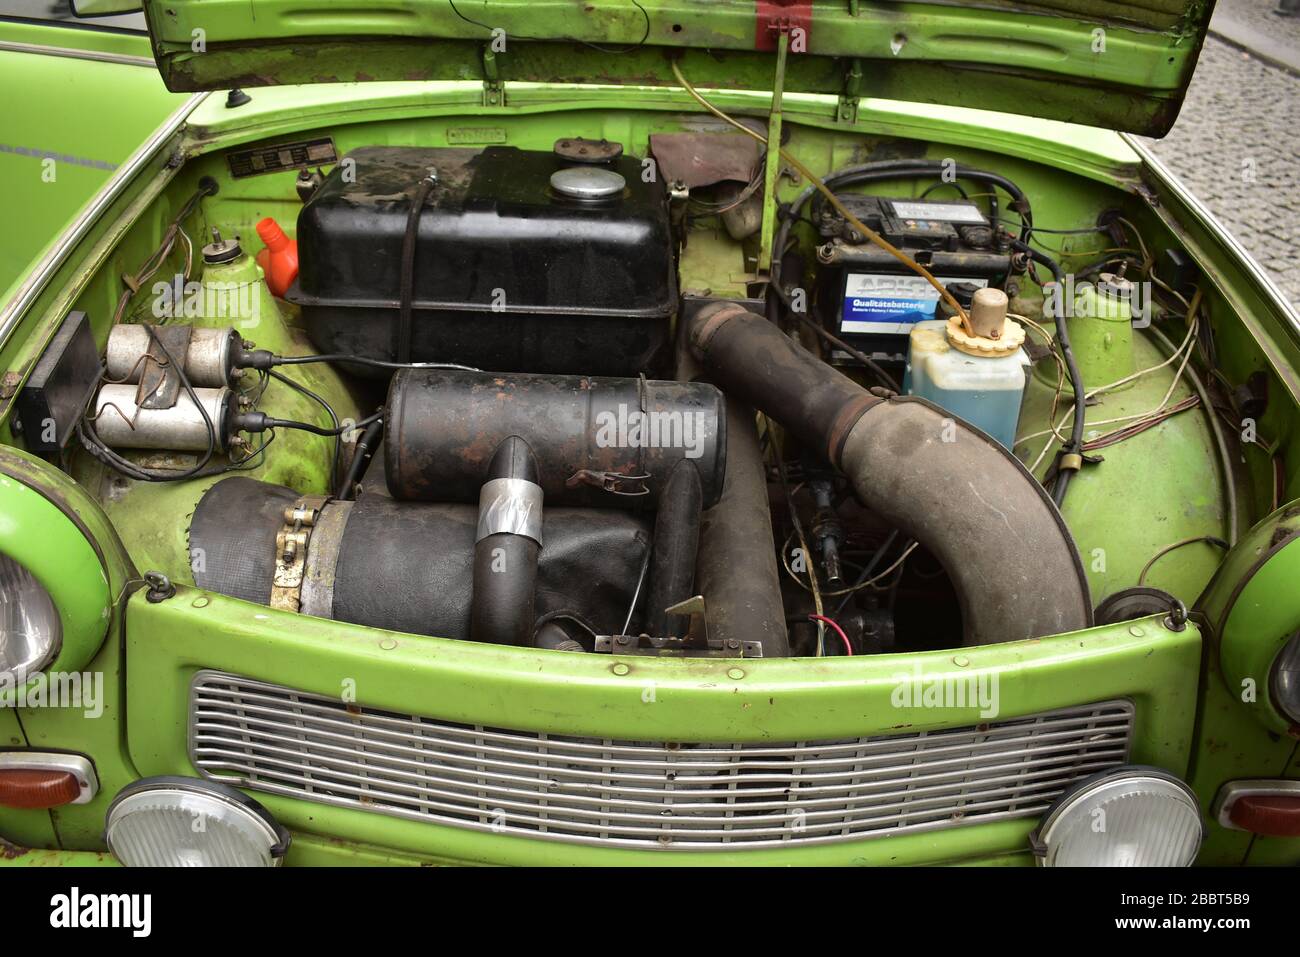 Engine of a Green Trabant 601 Vintage car from above Berlin Stock